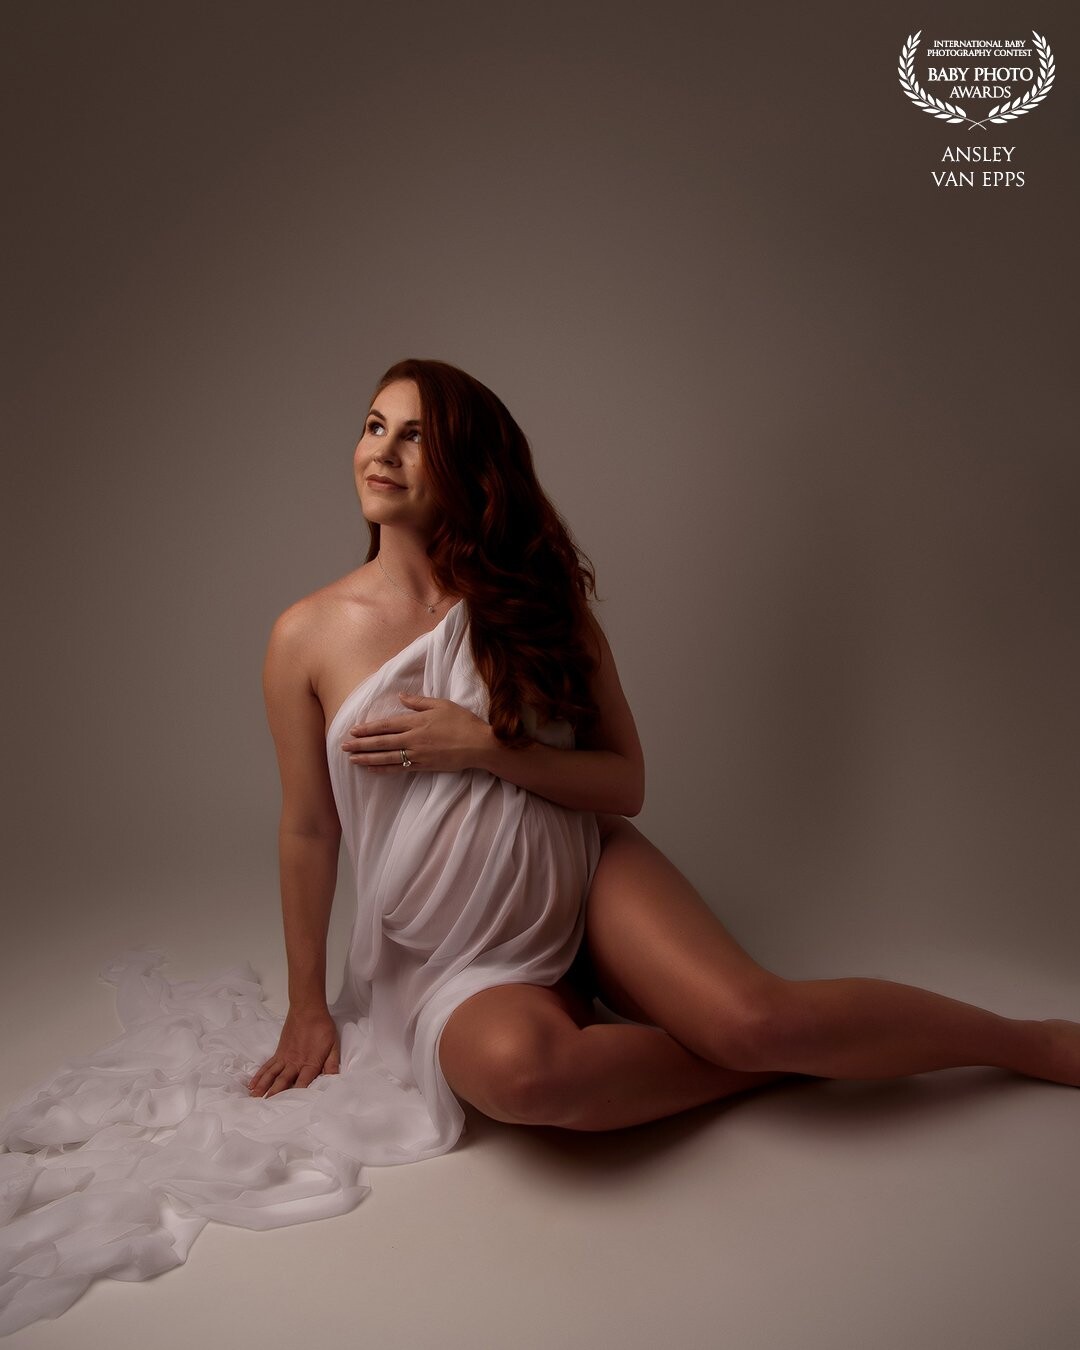 Beautiful Holden loved her body and the way she looked during pregnancy and wanted to capture this time during her pregnancy. We chose minimalist dresses and opted for simple white silk to really show how amazing the female body is.